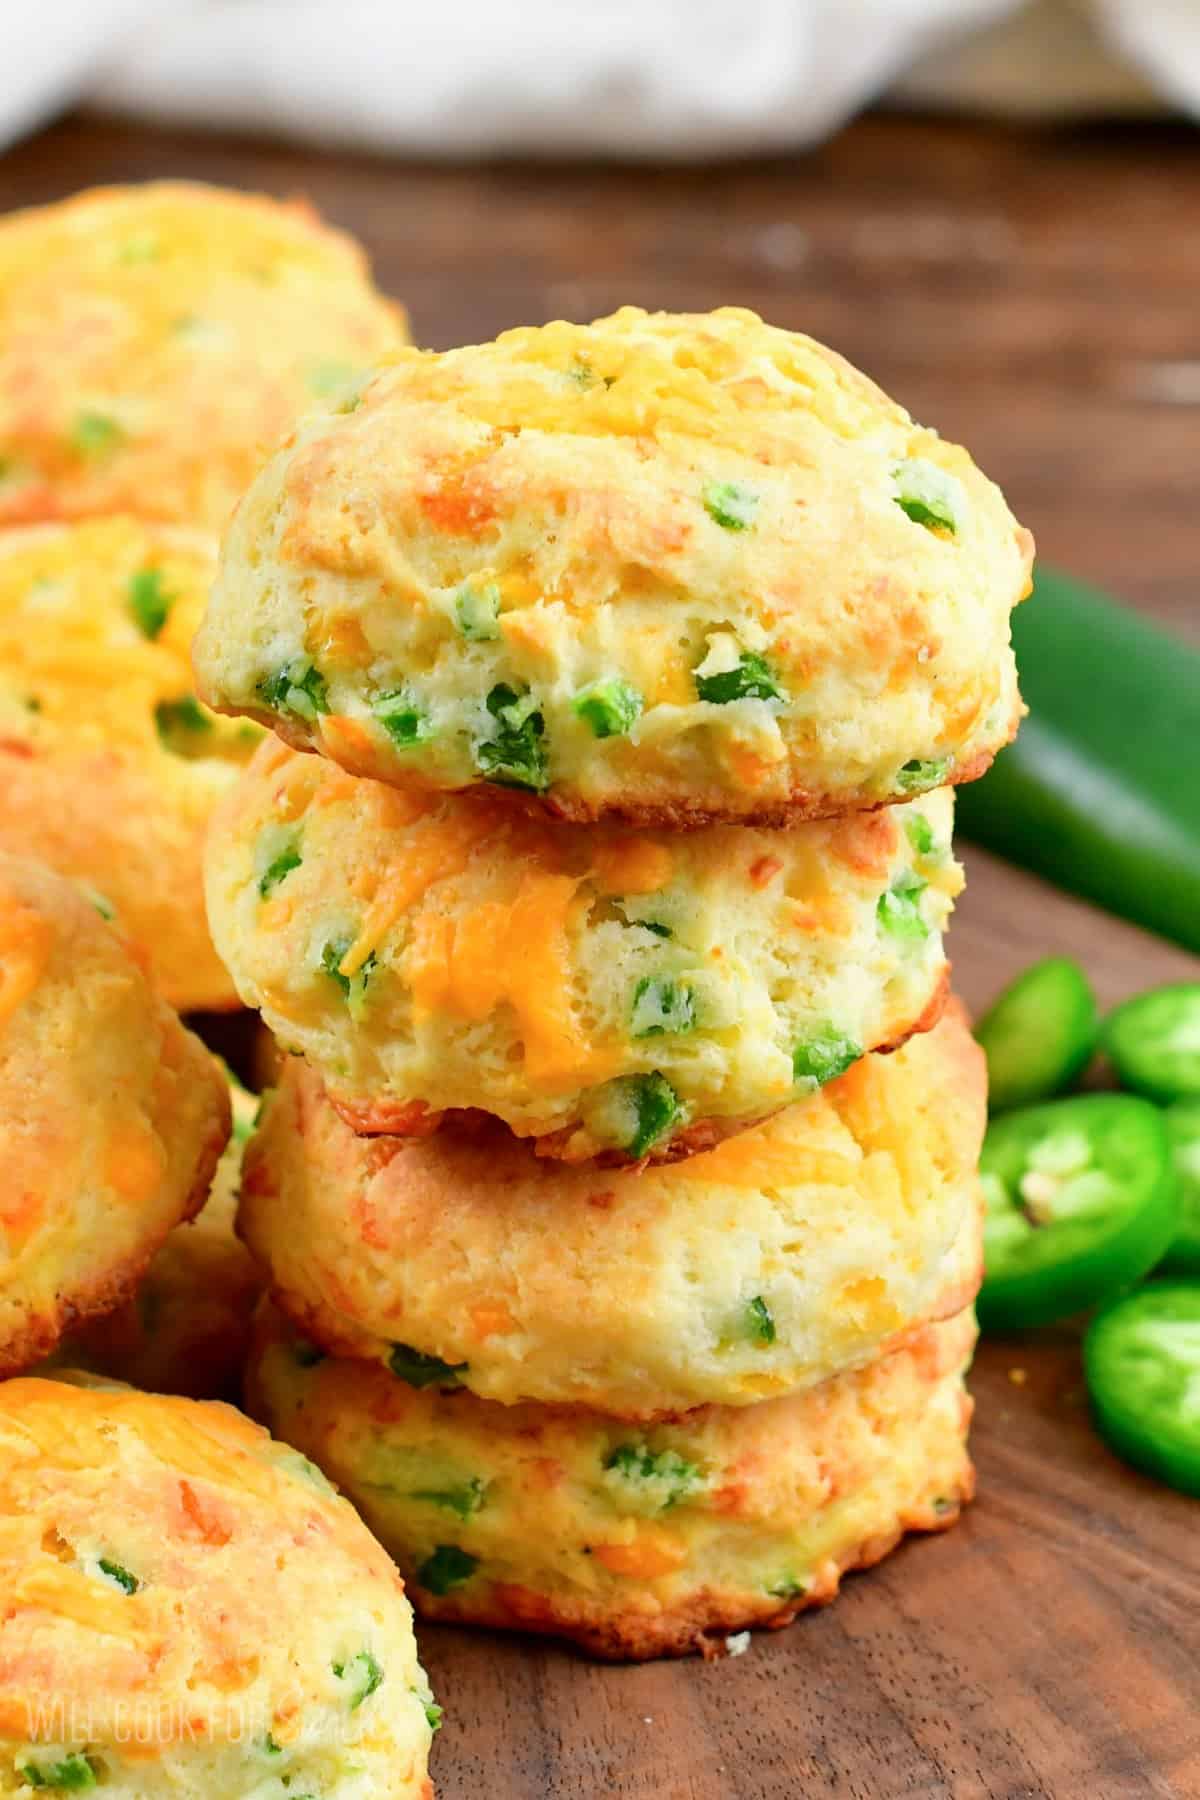 Stack of four jalapeno cheddar biscuits on a cutting board.